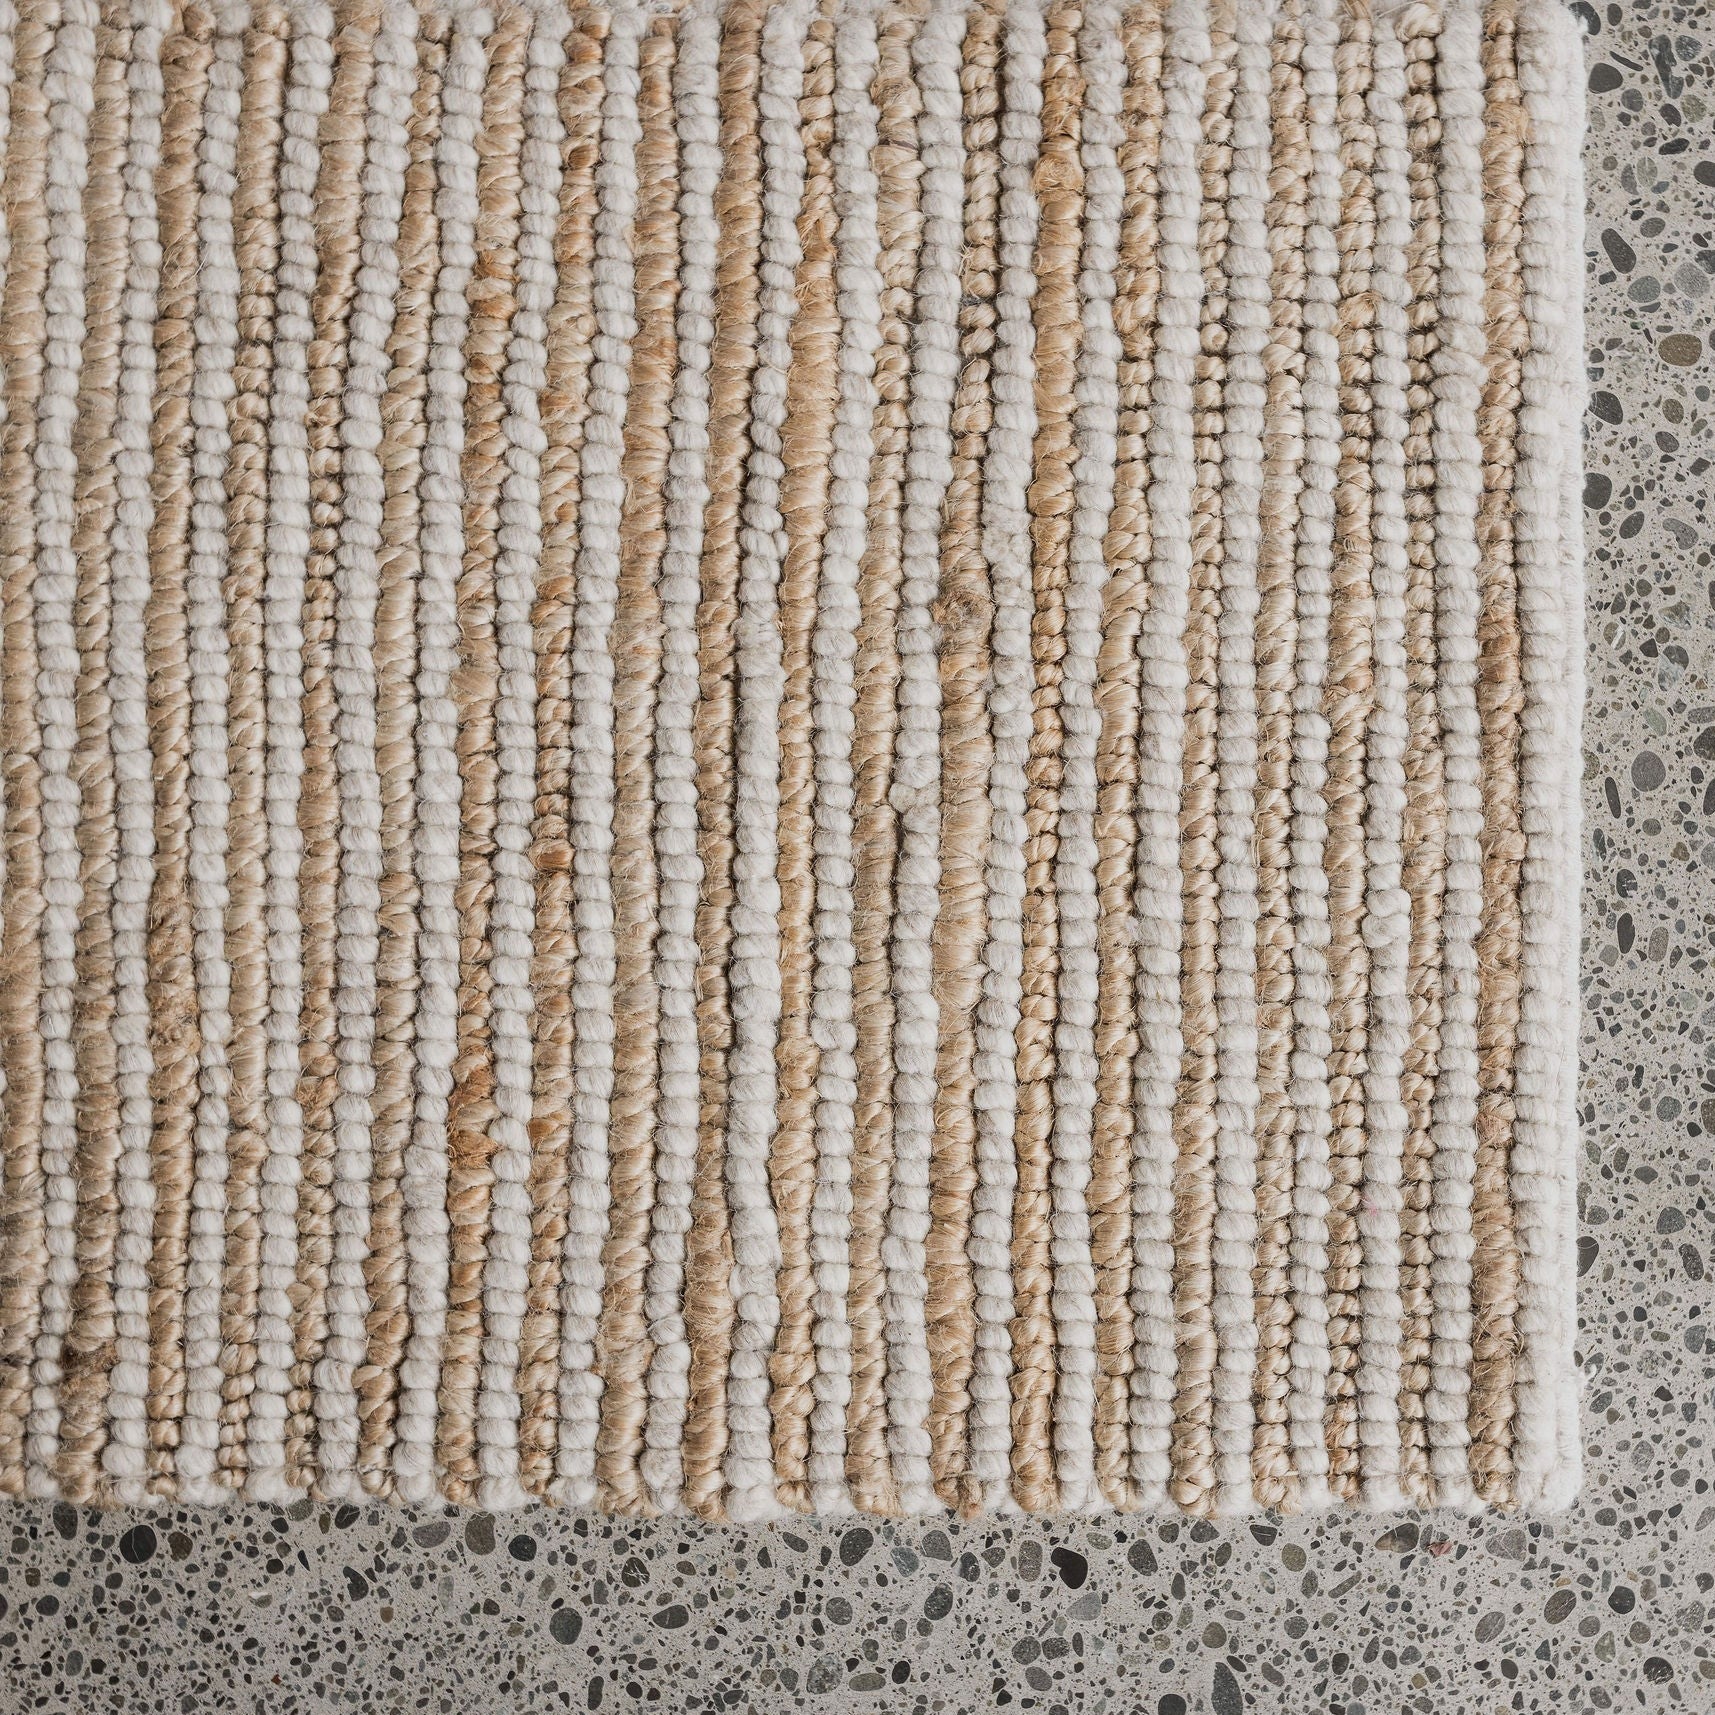 lima jute floor rug for holiday homes from corcovado furniture store online nz